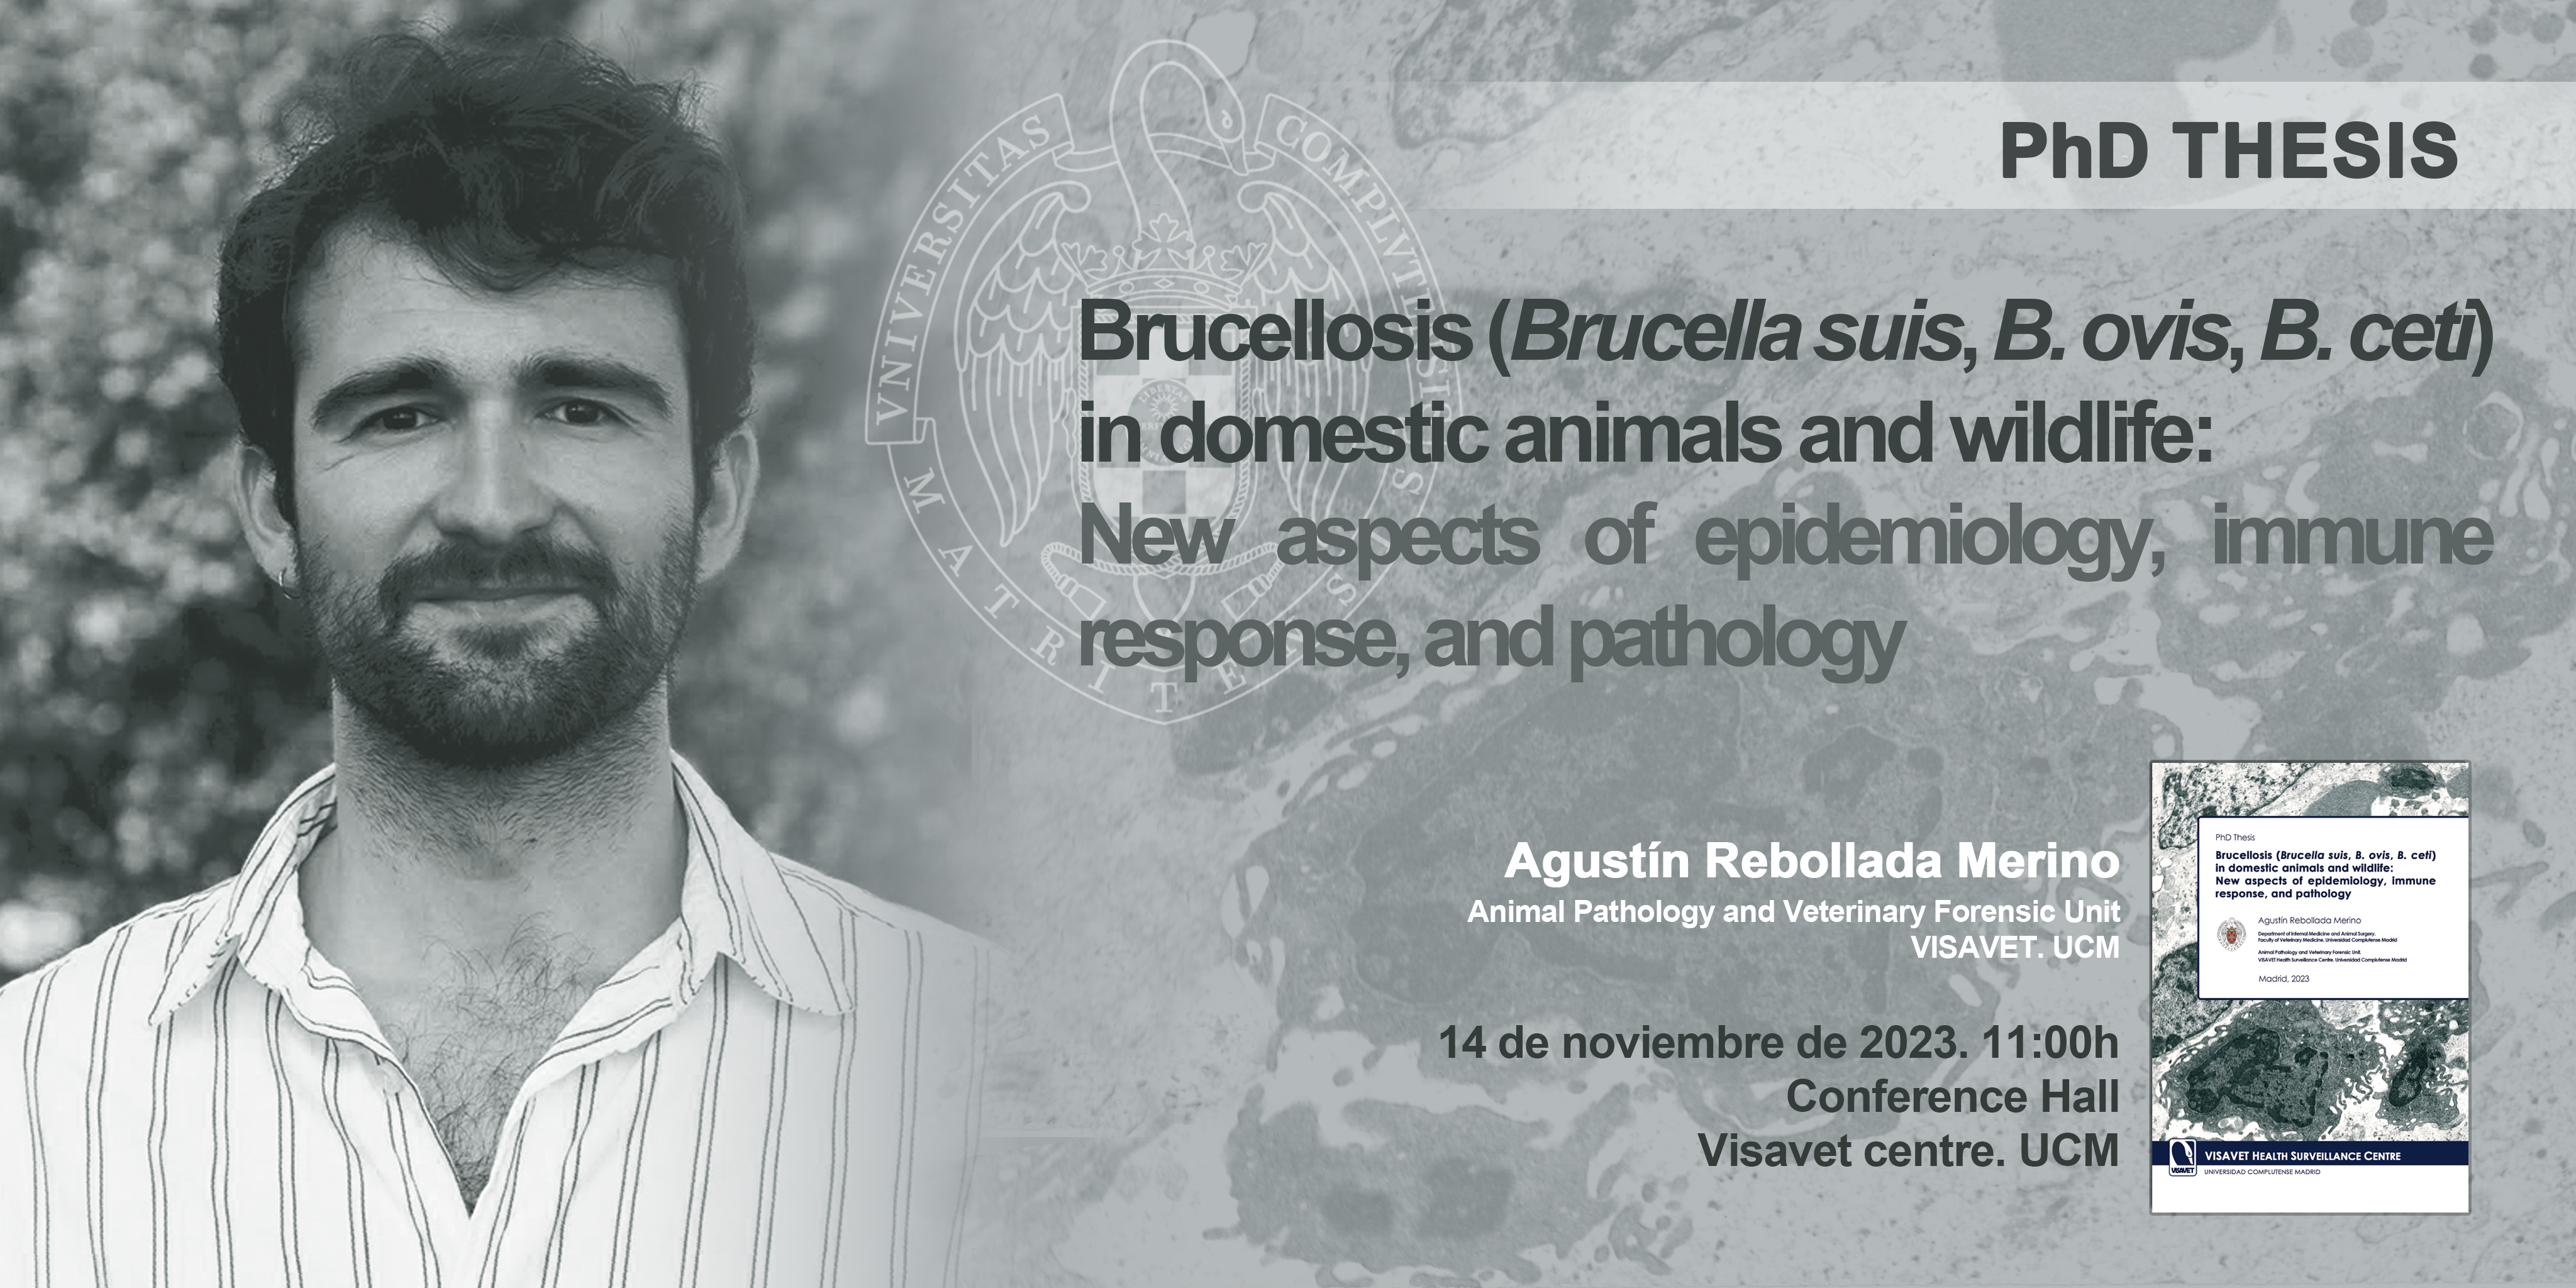 Agustn Miguel Rebollada Merino. Brucellosis (Brucella suis, B. ovis, B. ceti) in domestic animals and wildlife: New aspects of epidemiology, immune response, and pathology